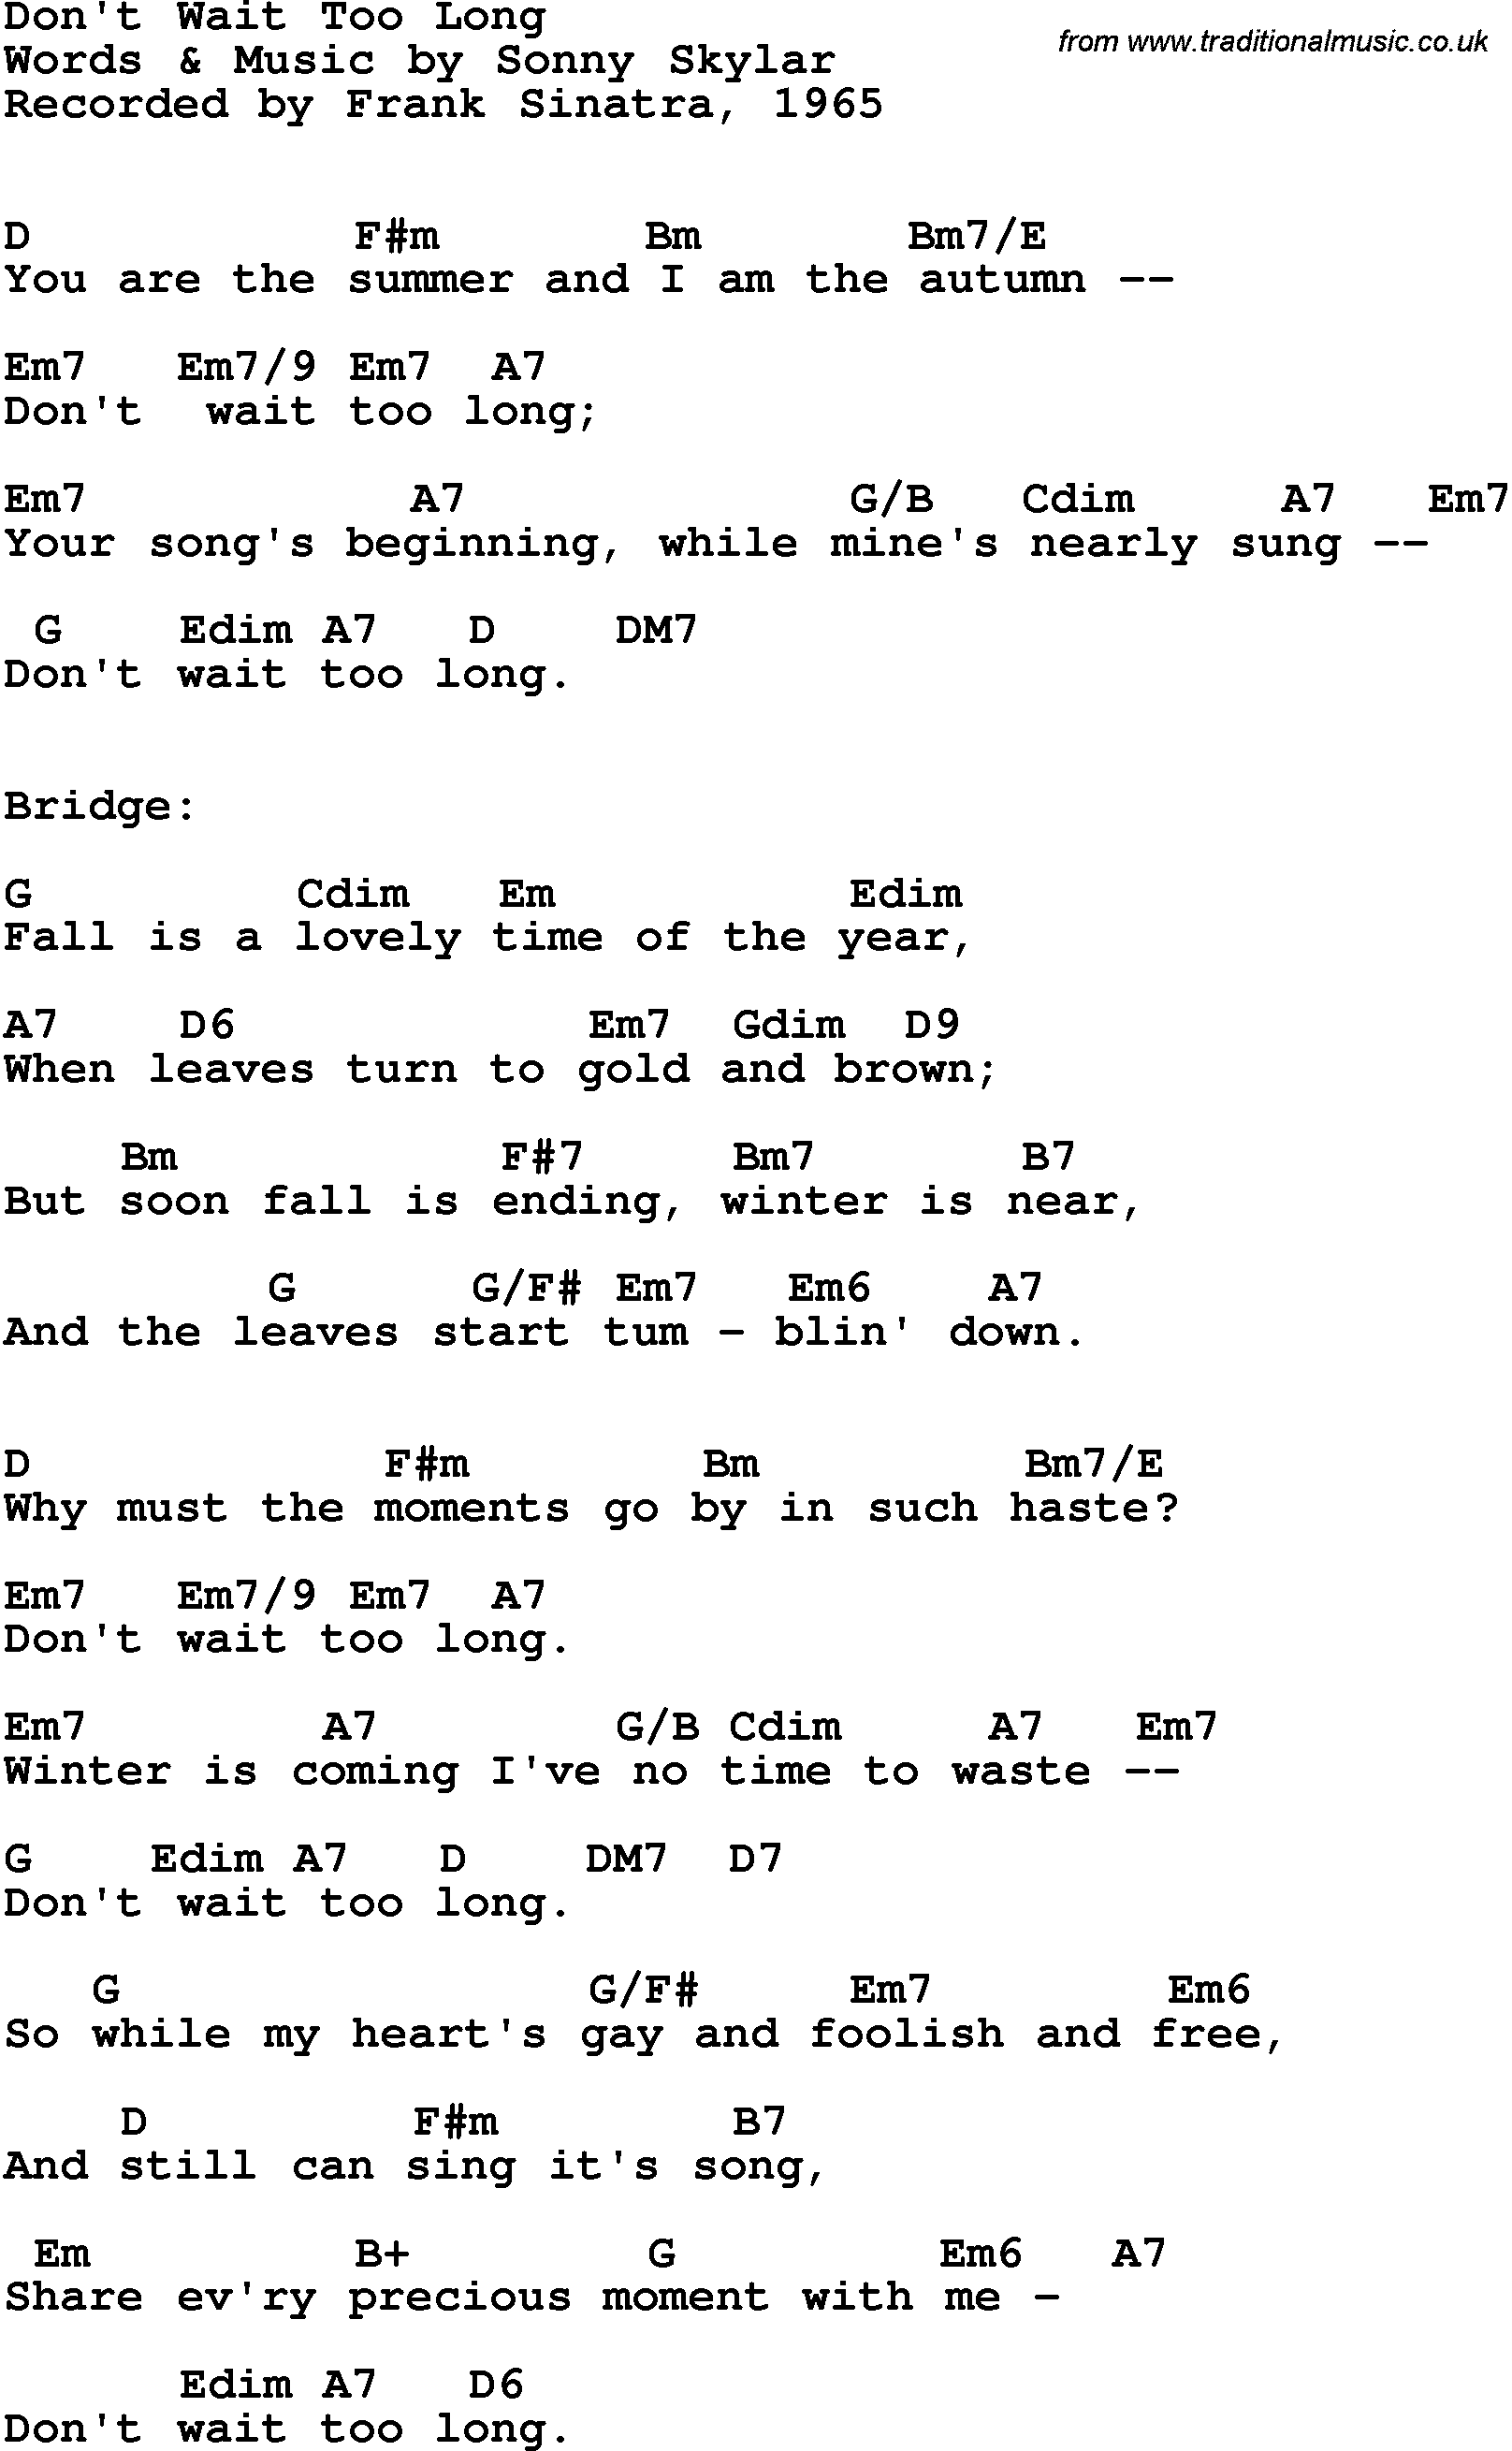 Song lyrics with guitar chords for Don't Wait Too Long - Frank Sinatra